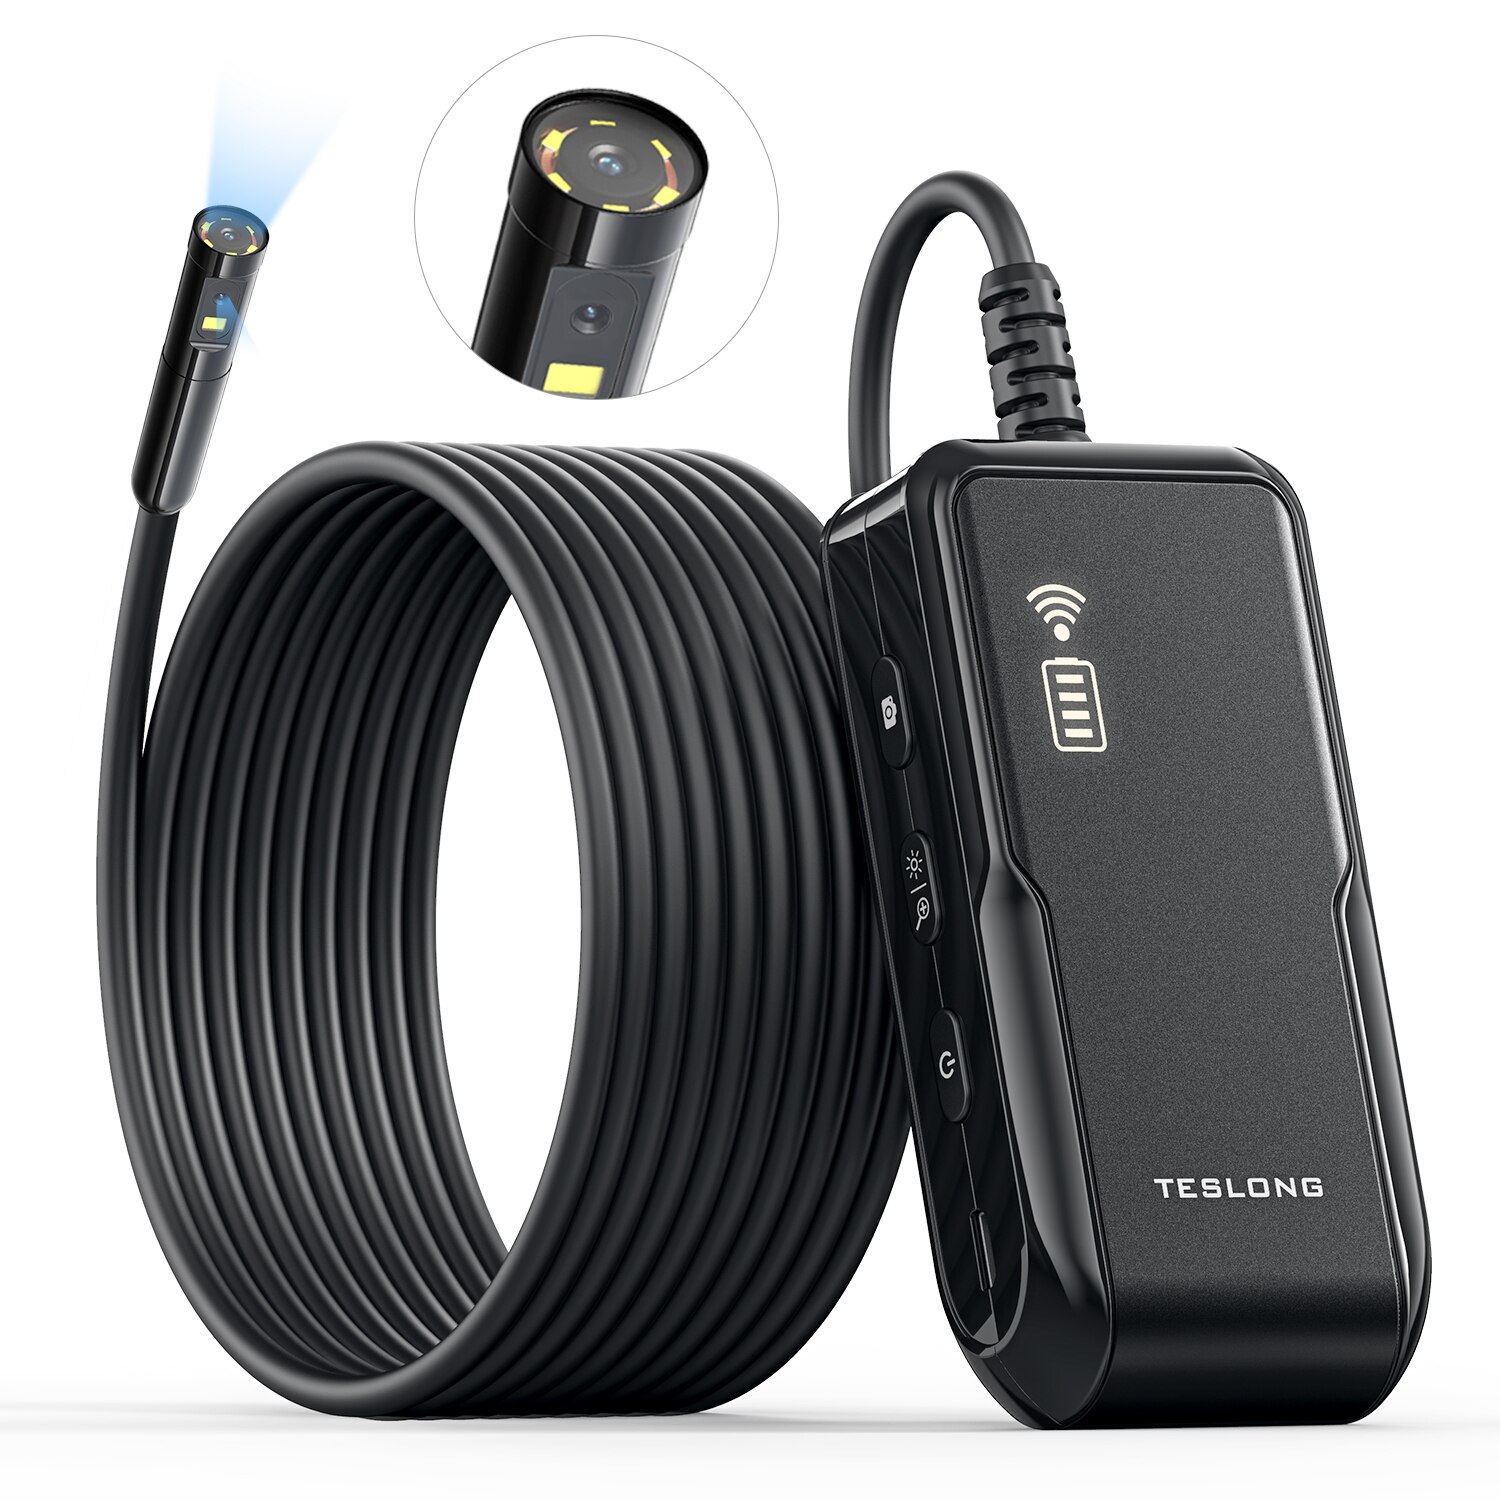 Dual Lens Wireless Endoscope 0.28In Dia 1080P Bore Scope Inspection Camera for Android and iOS